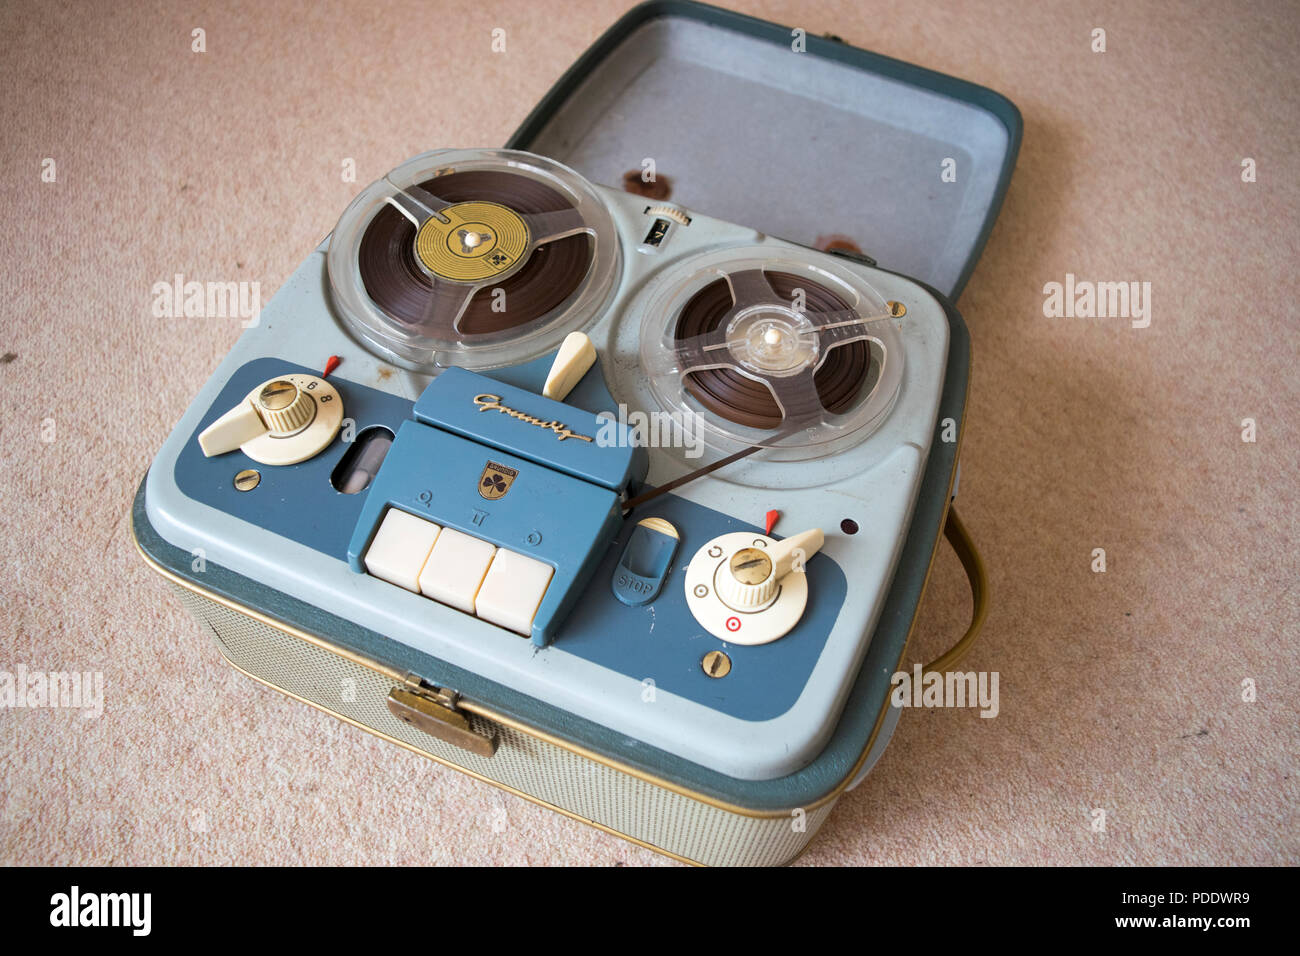 Grundig reel to reel tape recorder from the 1960's Photo -